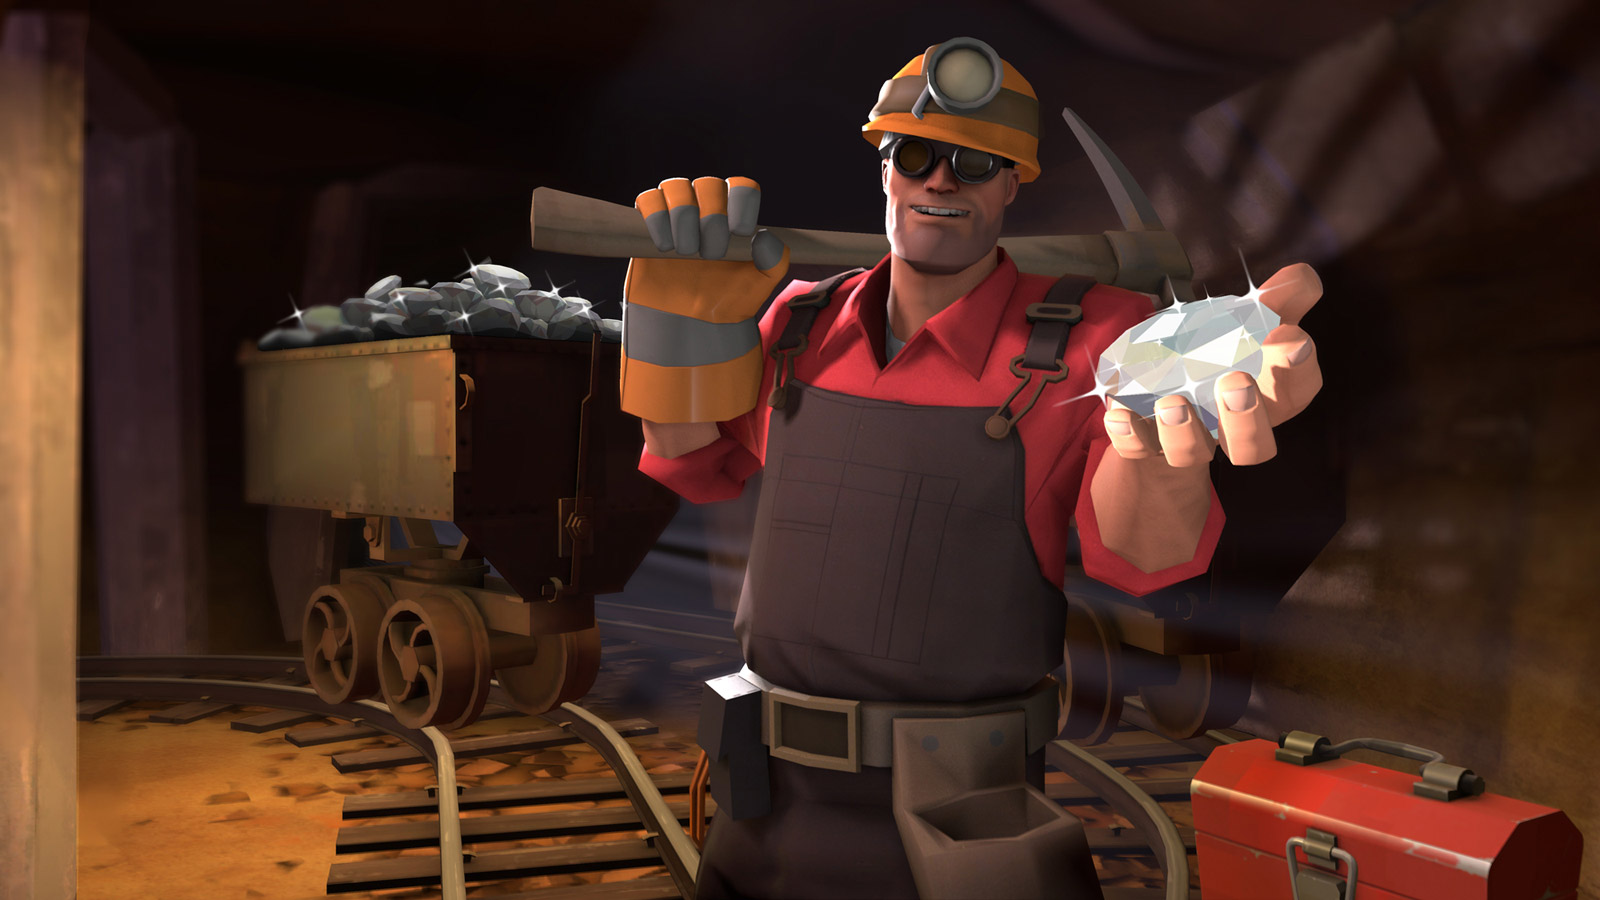 http://www.teamfortress.com/images/posts/the_mines.jpg